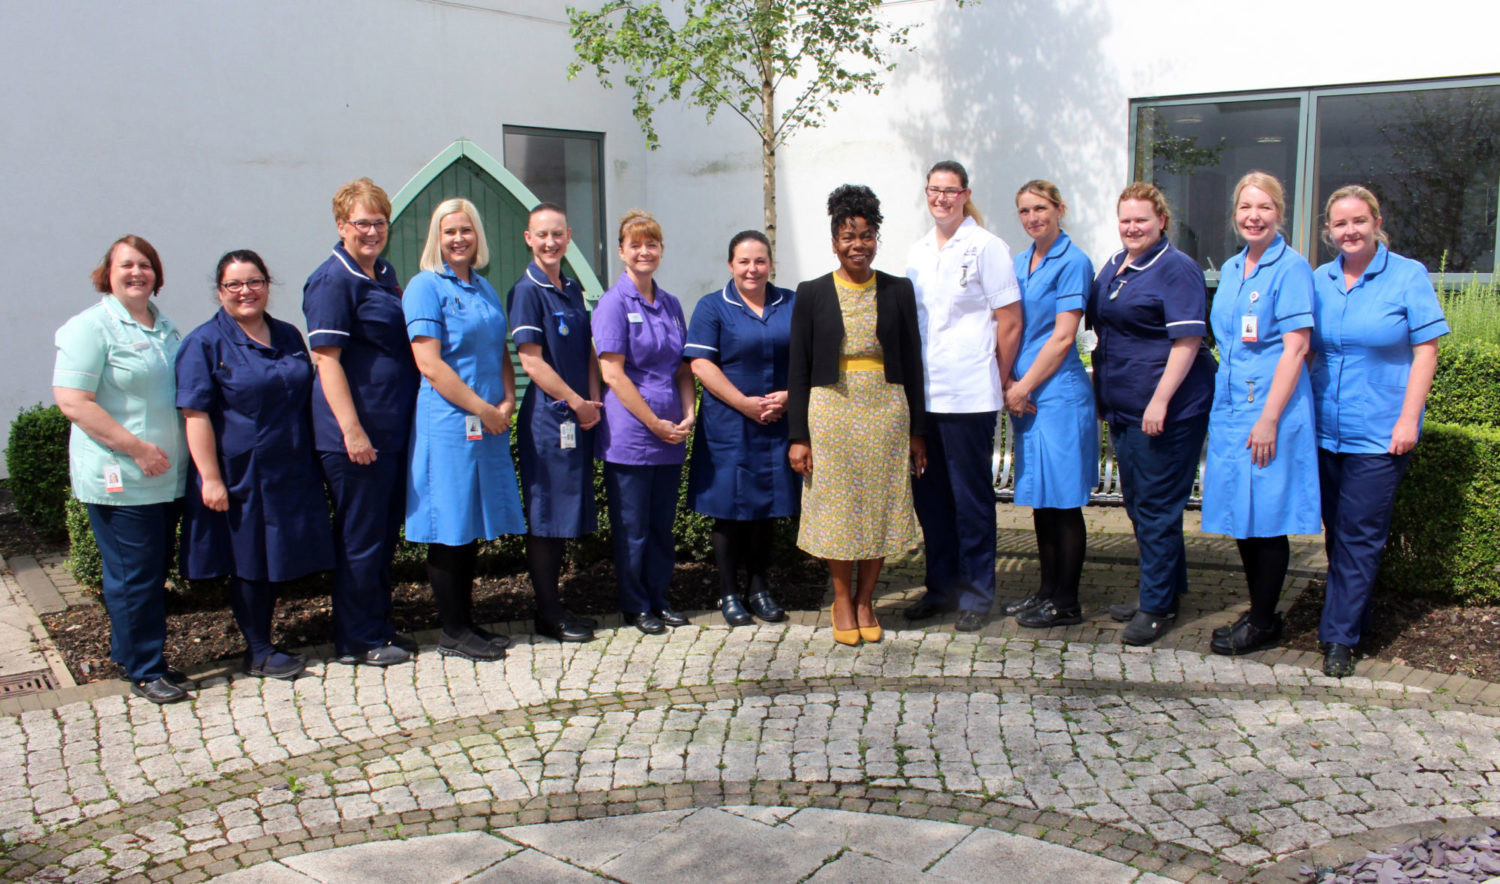 Chief Midwifery Officer visit to East Lancs